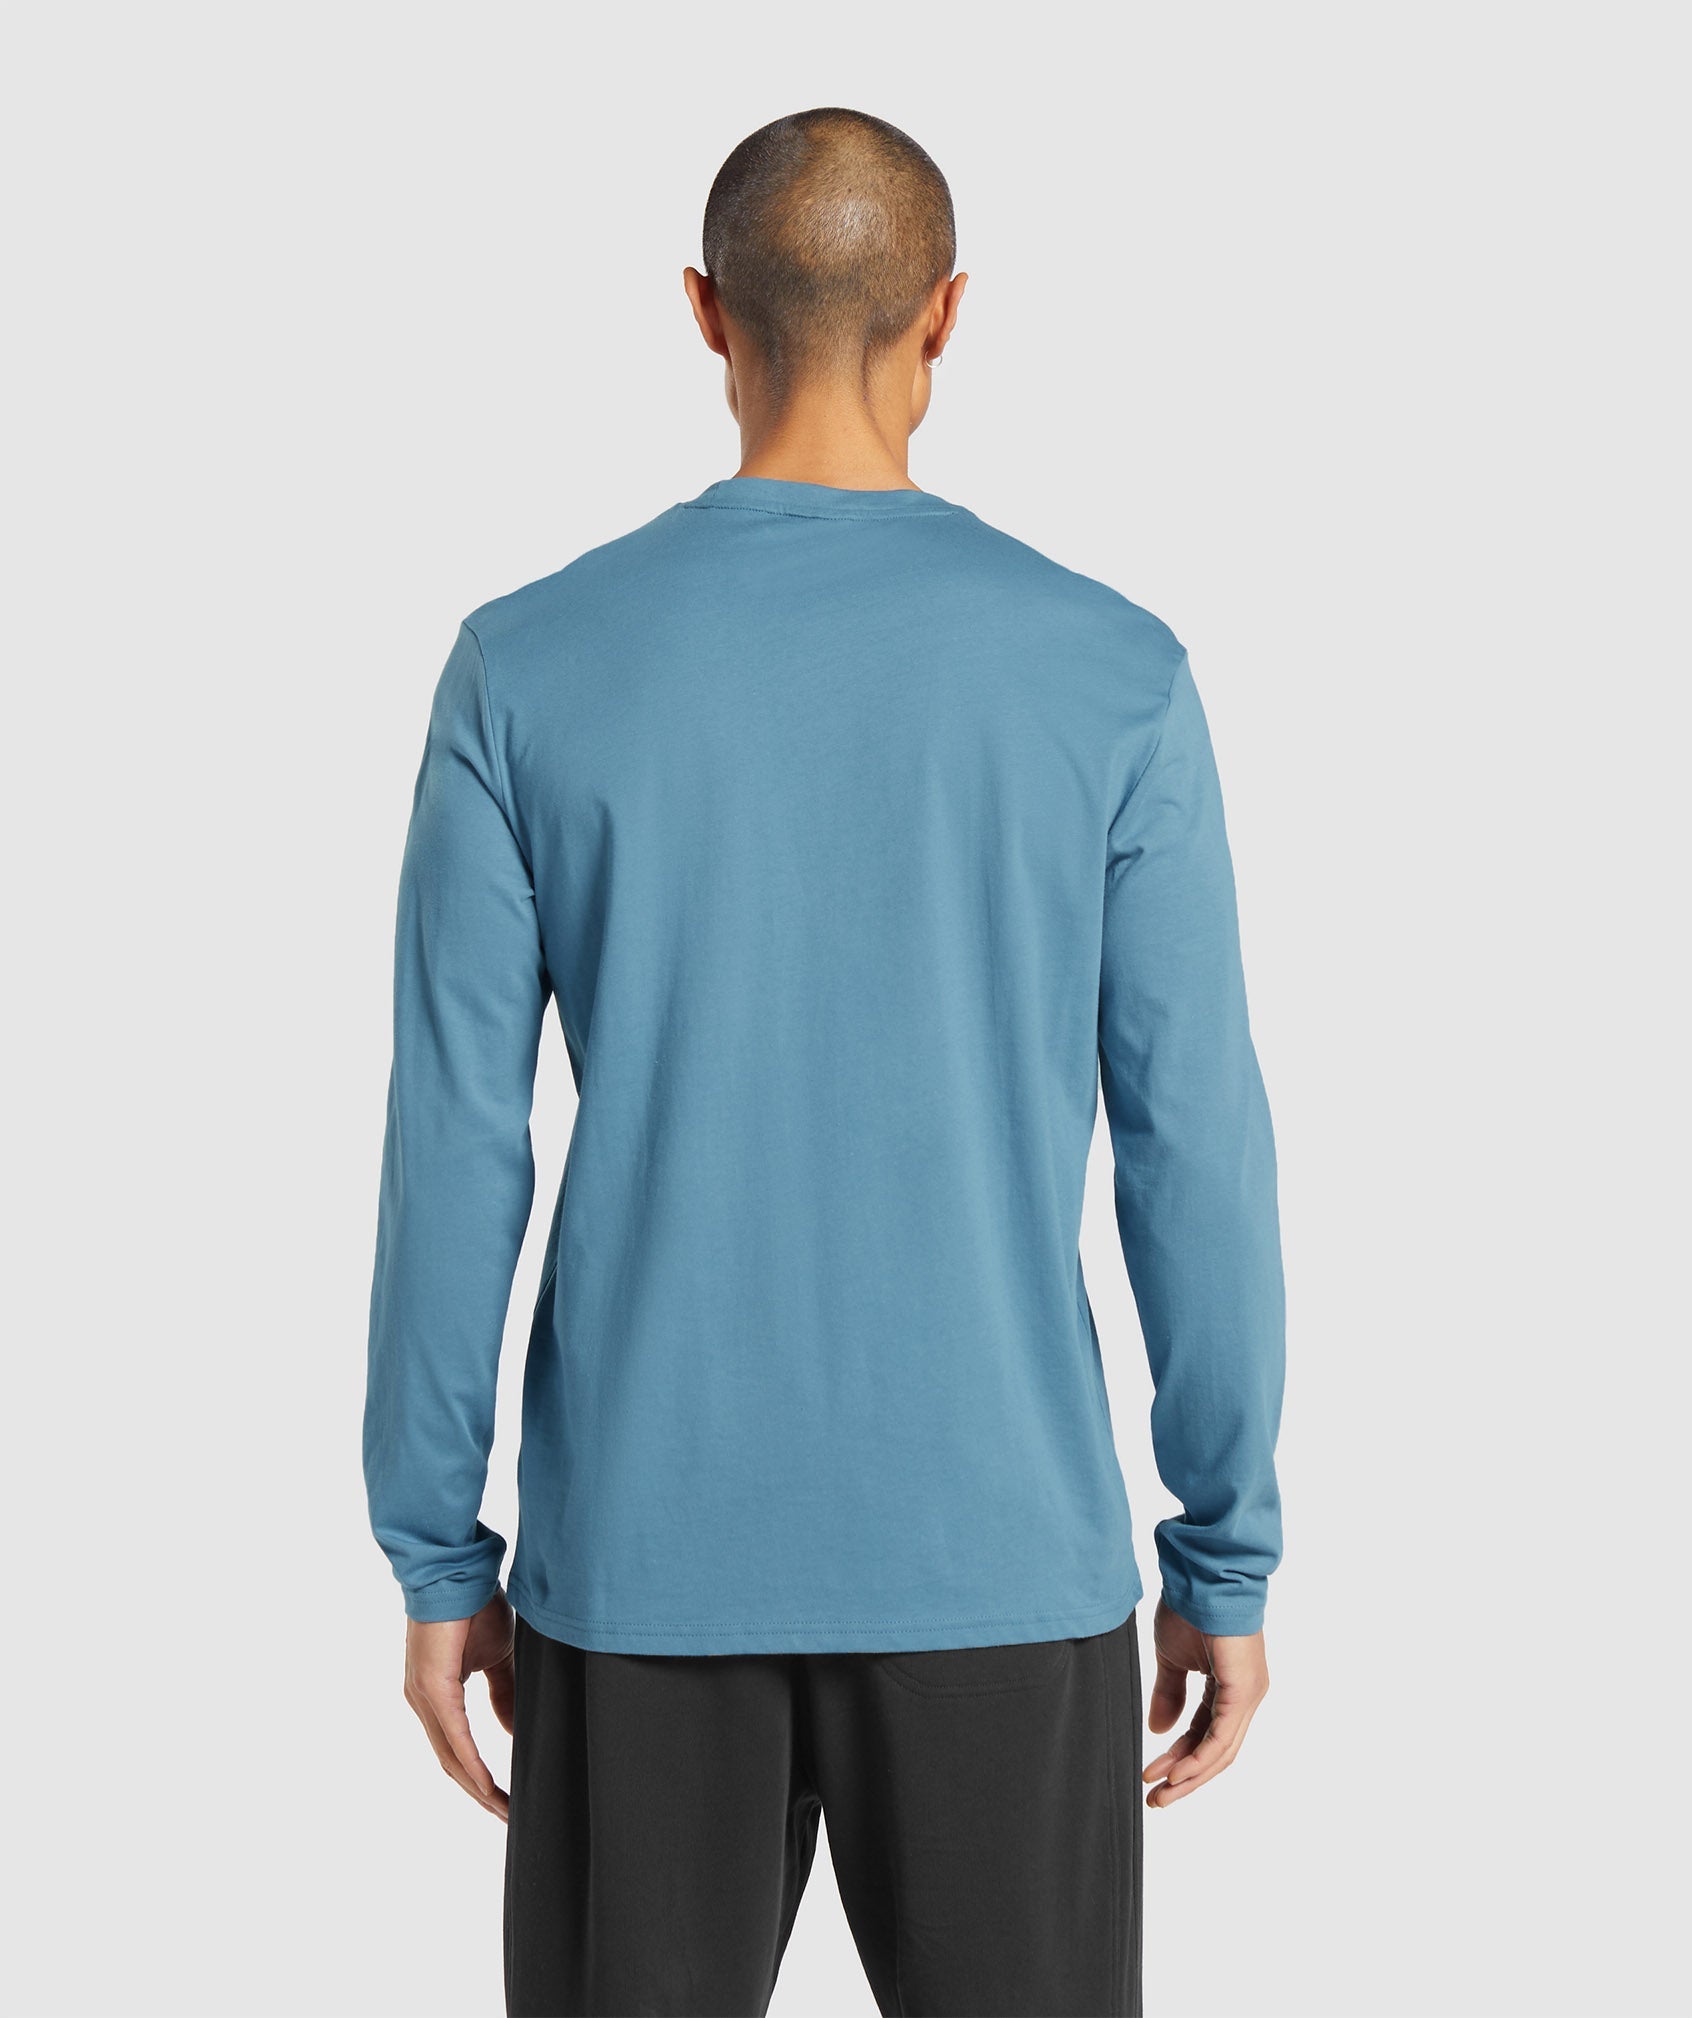 Crest Long Sleeve T-Shirt in Faded Blue - view 2